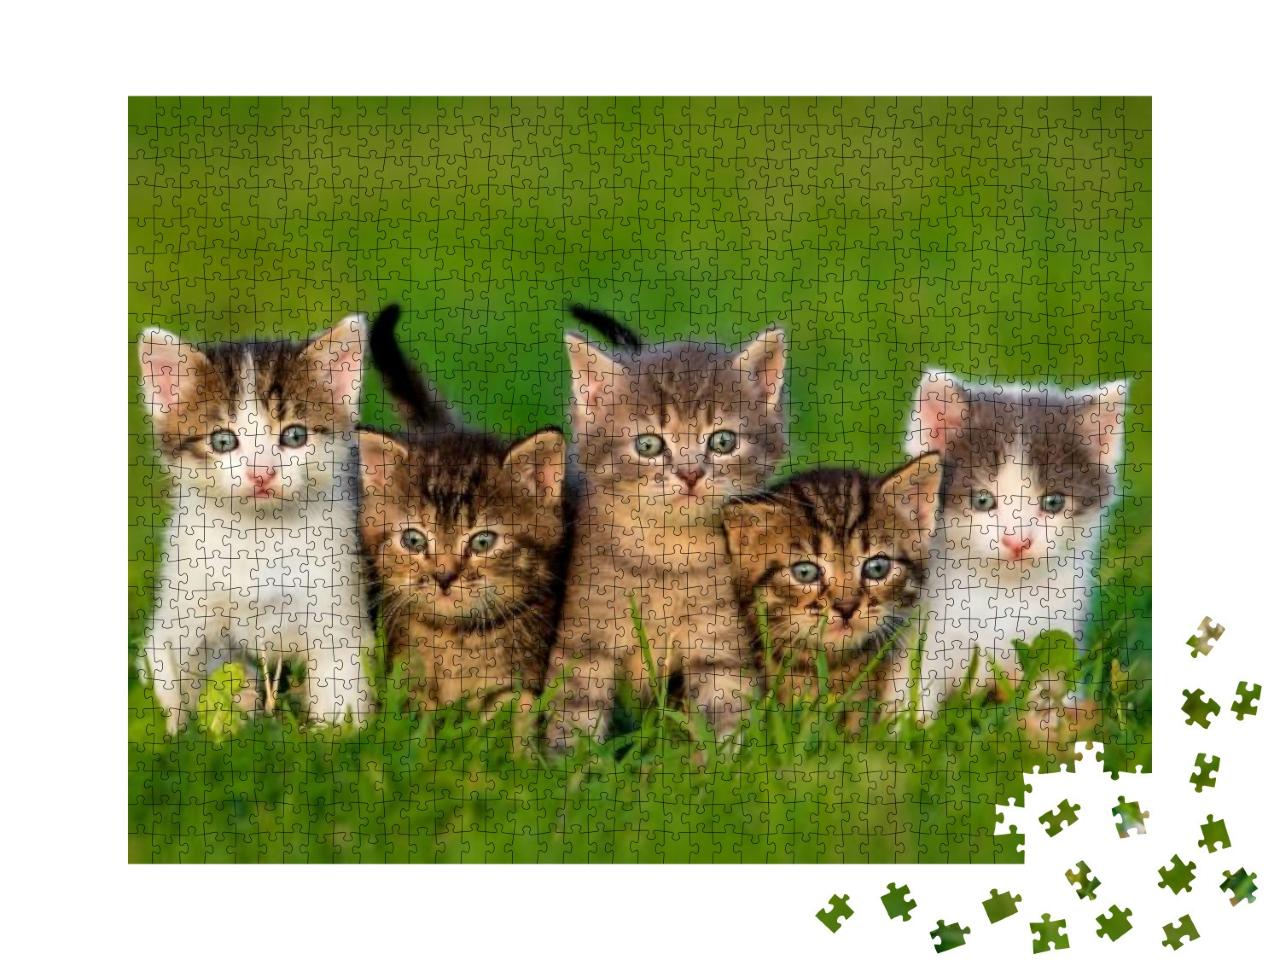 Group of Five Little Kittens Sitting on the Grass... Jigsaw Puzzle with 1000 pieces